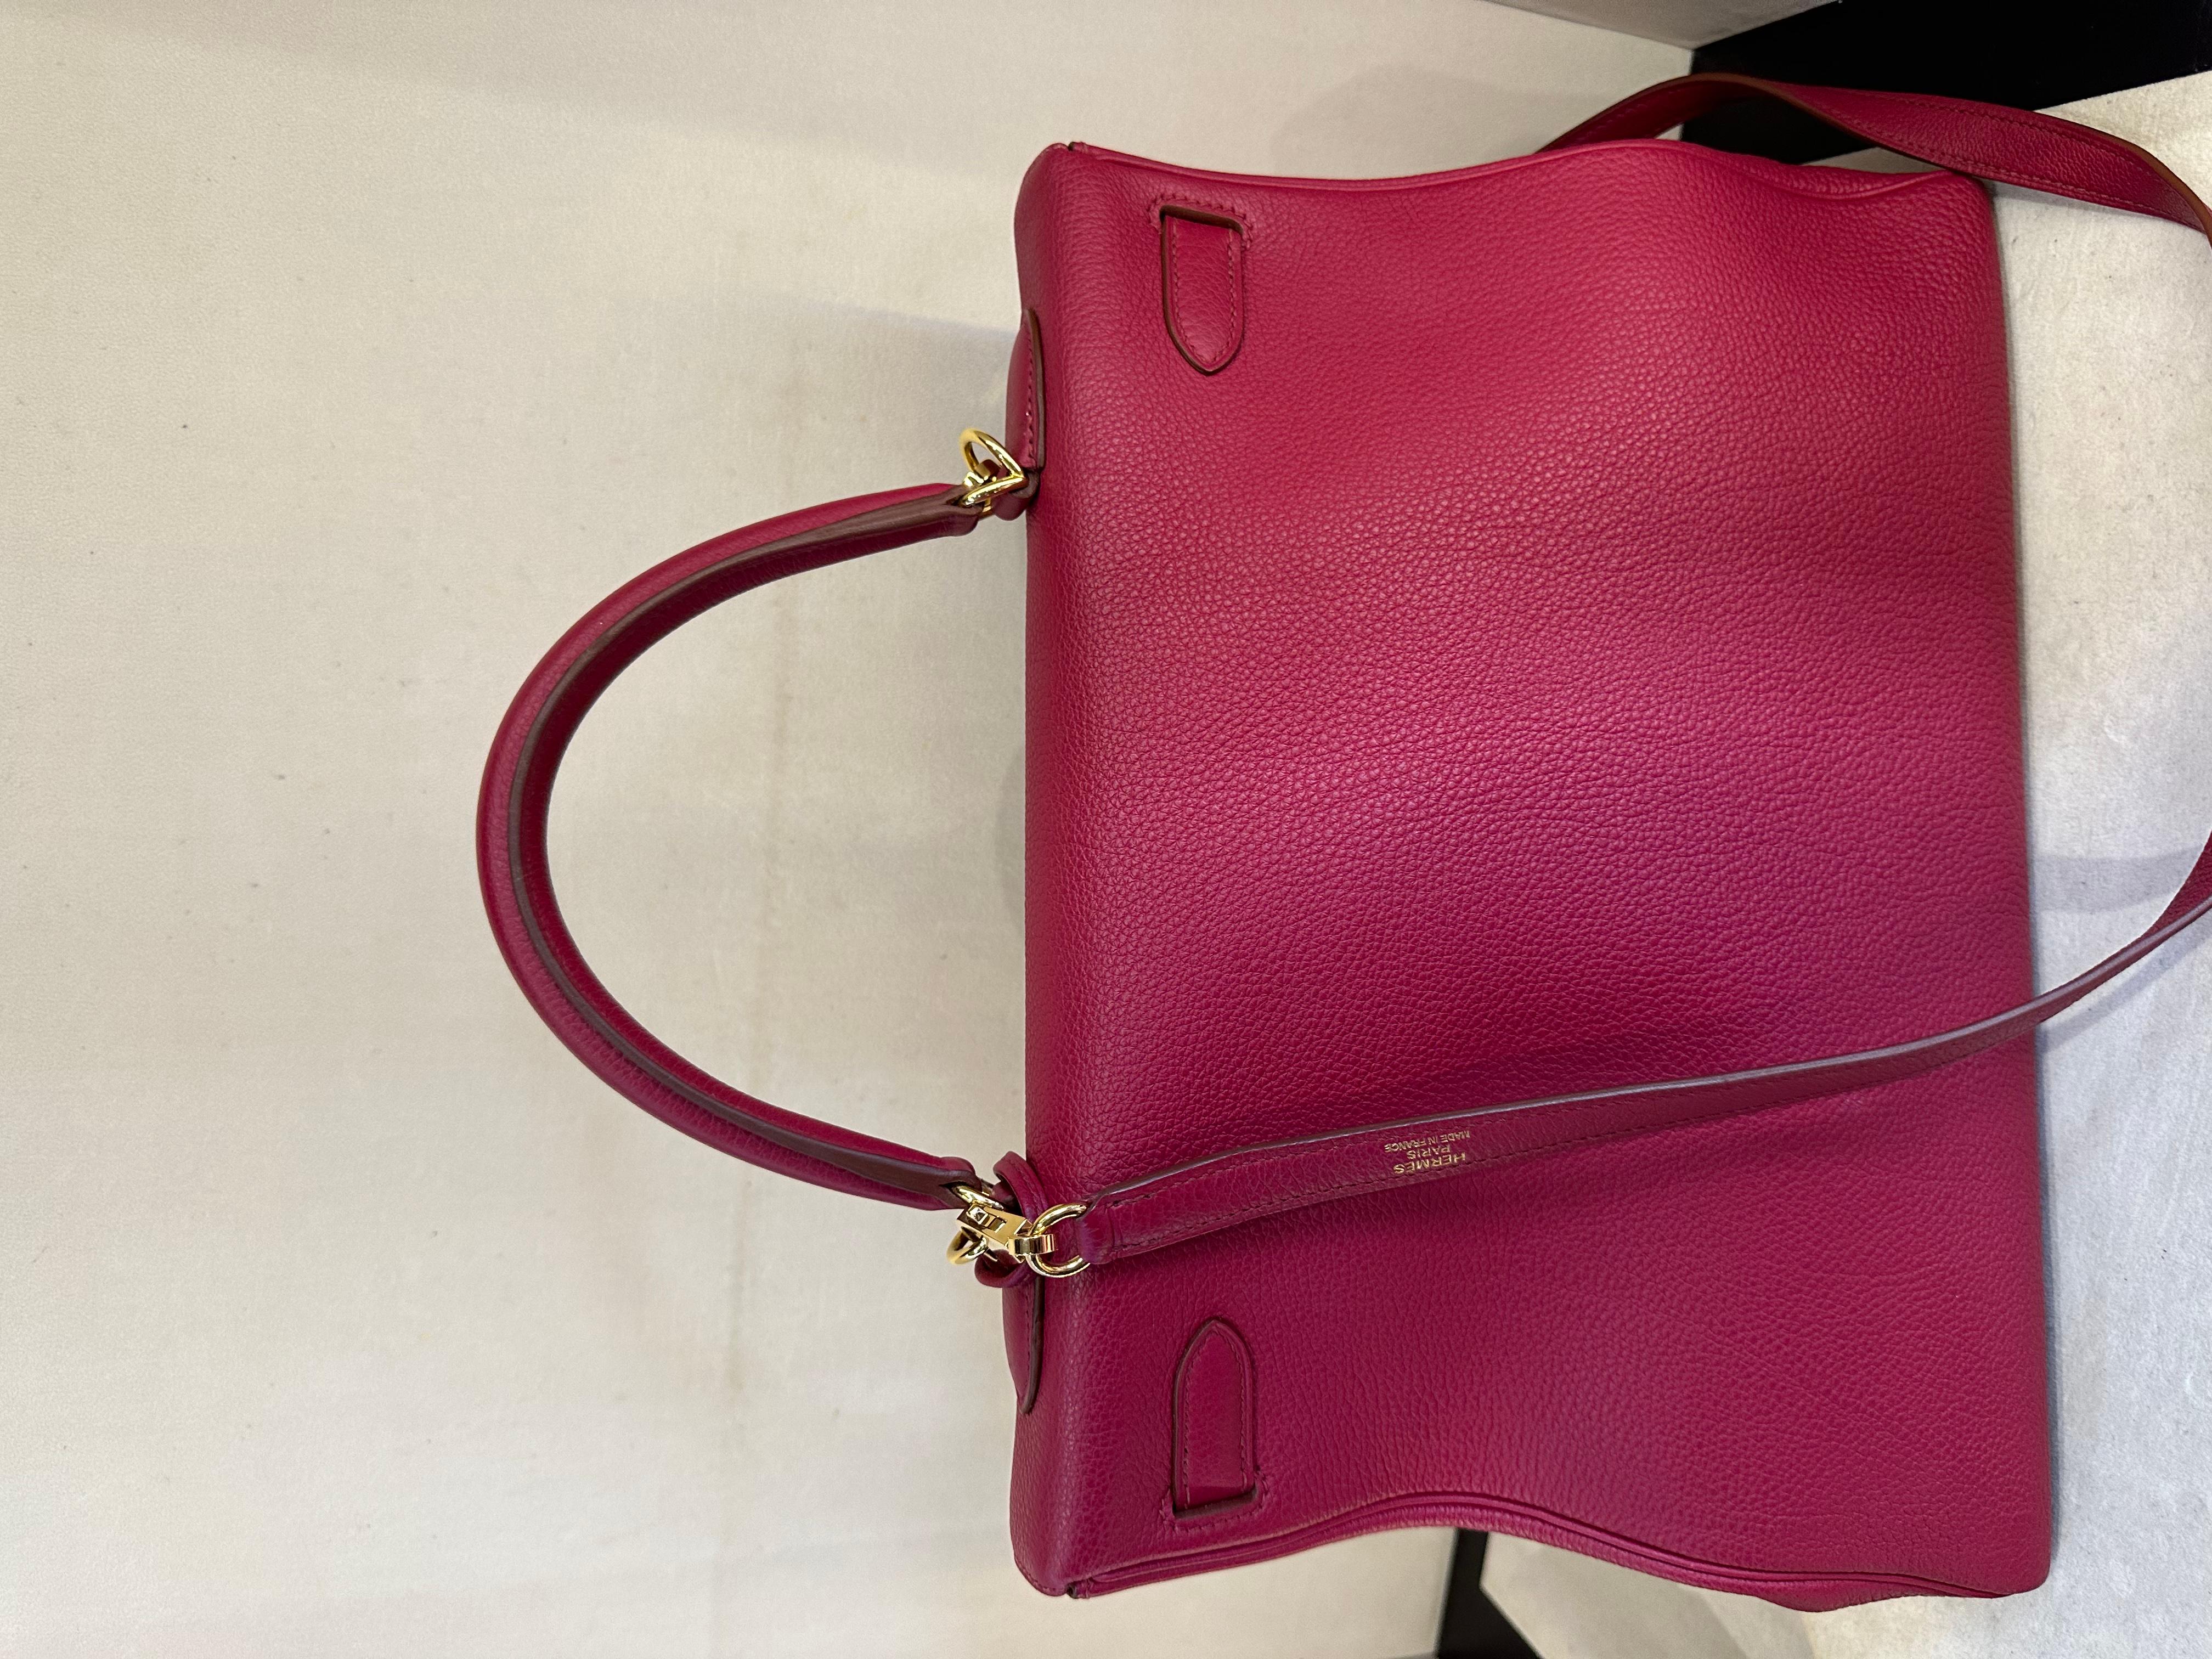 Hermès Kelly bag in Rubis colour, togo leather and gold hardware. This beautiful handbag is made in red, which stands out, yet remains highly versatile. The Togo leather is very durable and luxurious. As one of the most sought-after designer bags in